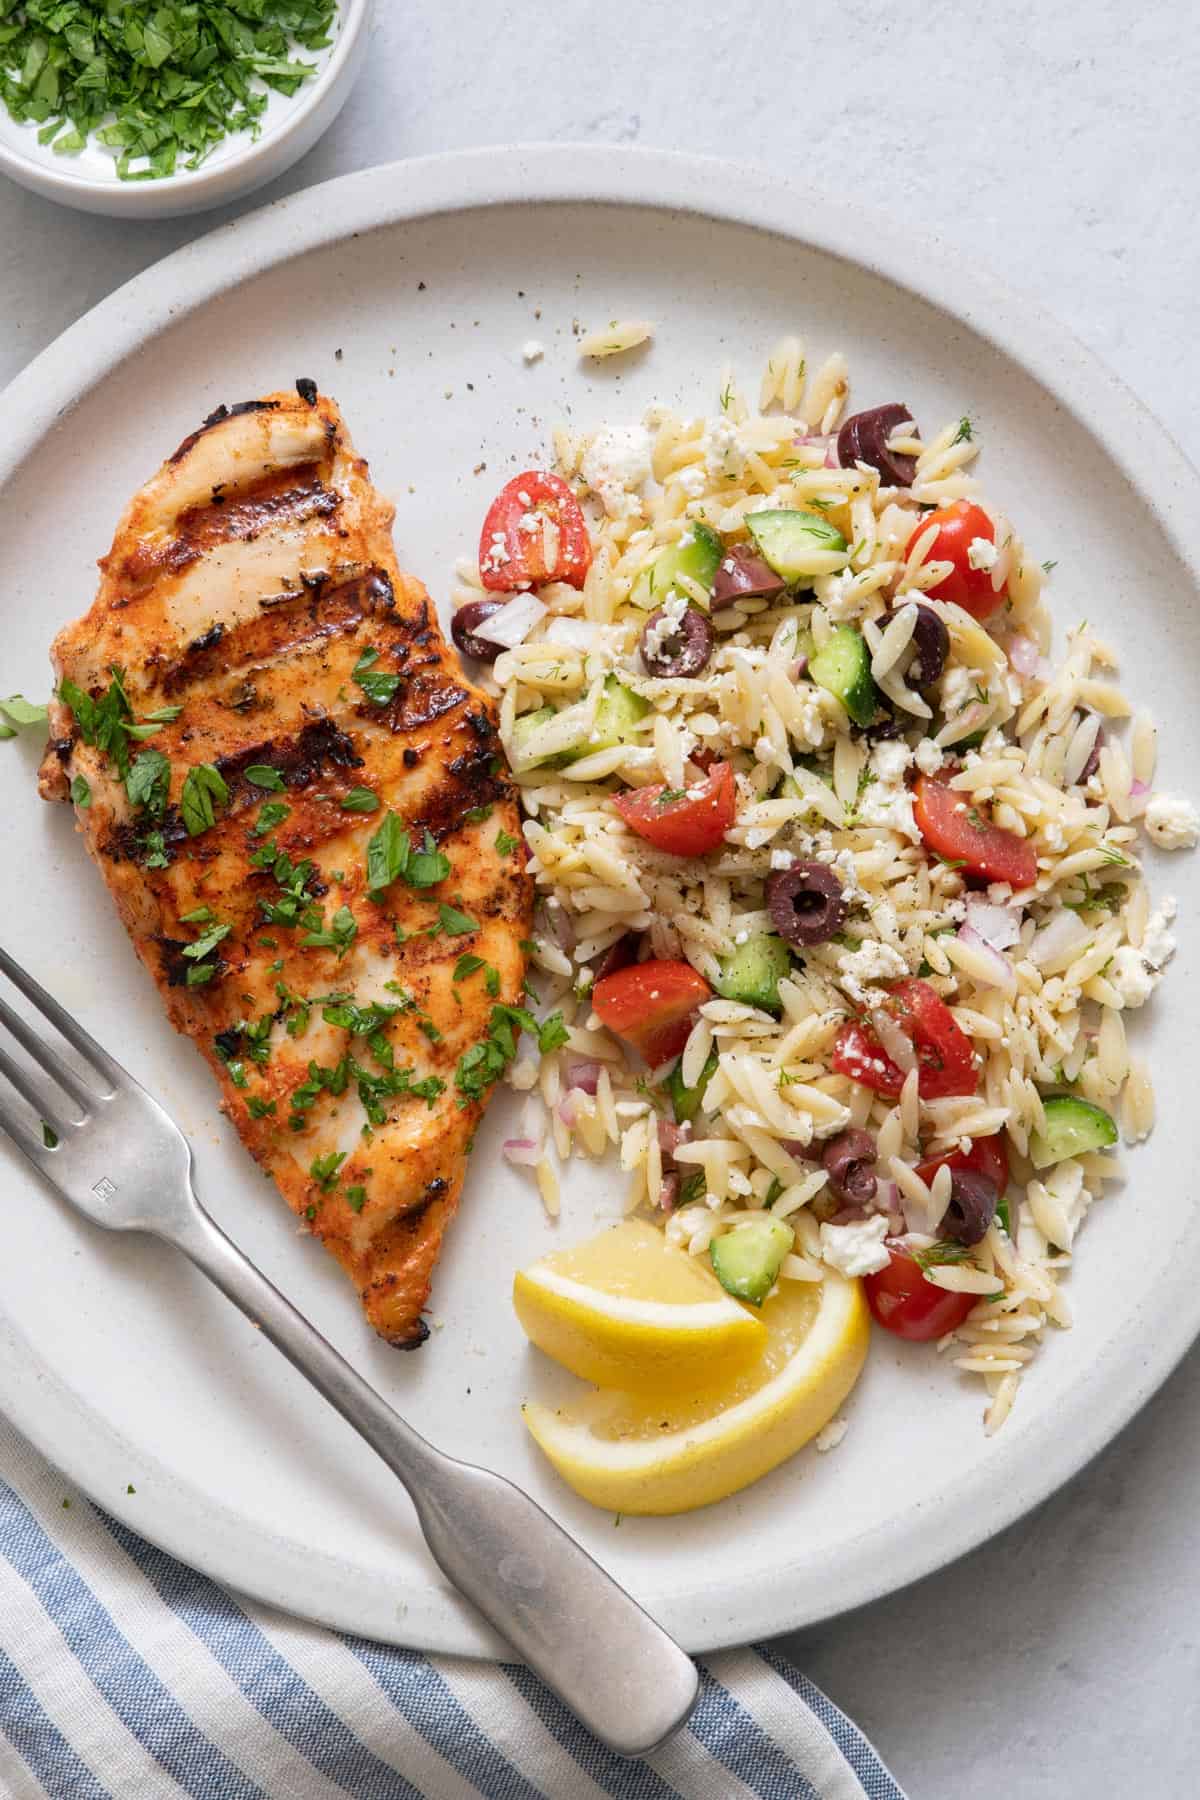 Plate with grilled chicken breast and next to orzo salad and garnished with fresh parsley and lemon wedges.